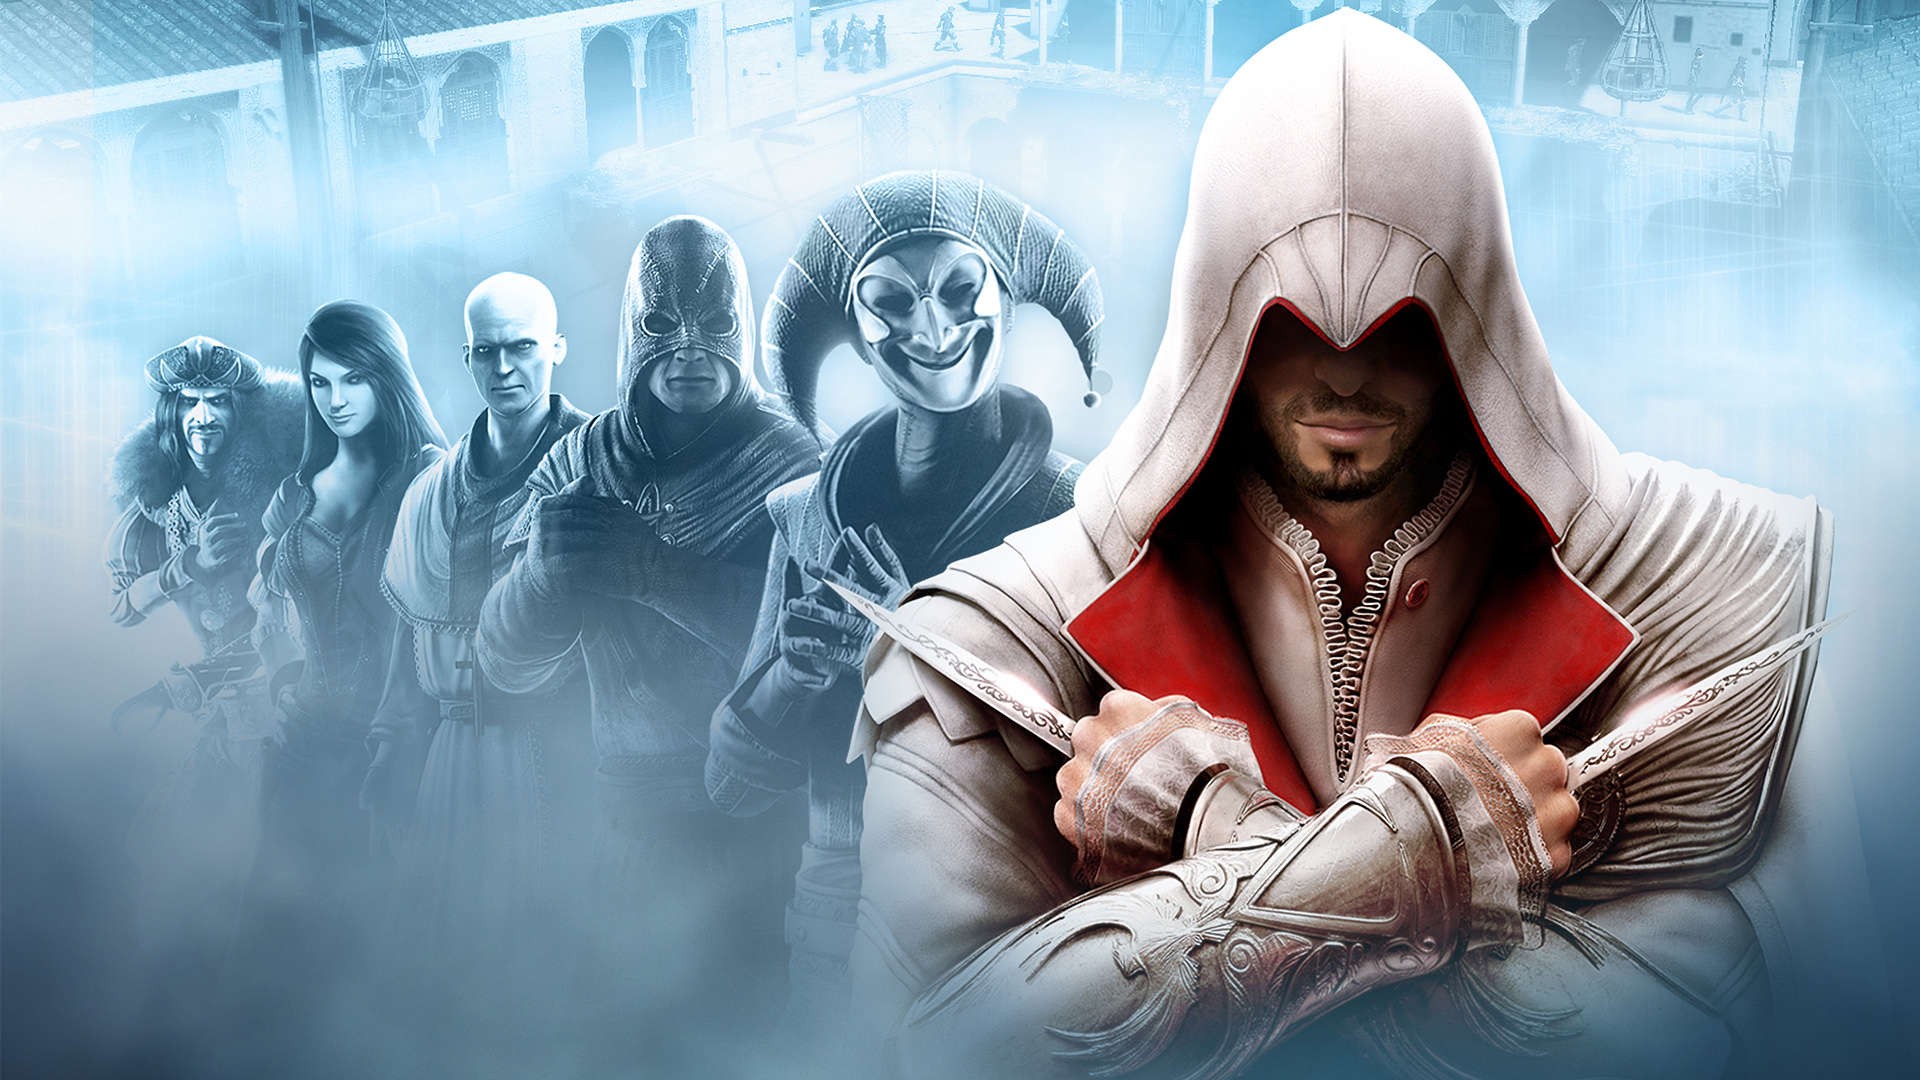 General 1920x1080 video games artwork Assassin's Creed Assassin's Creed: Brotherhood Ezio Auditore da Firenze PC gaming hoods video game man video game characters